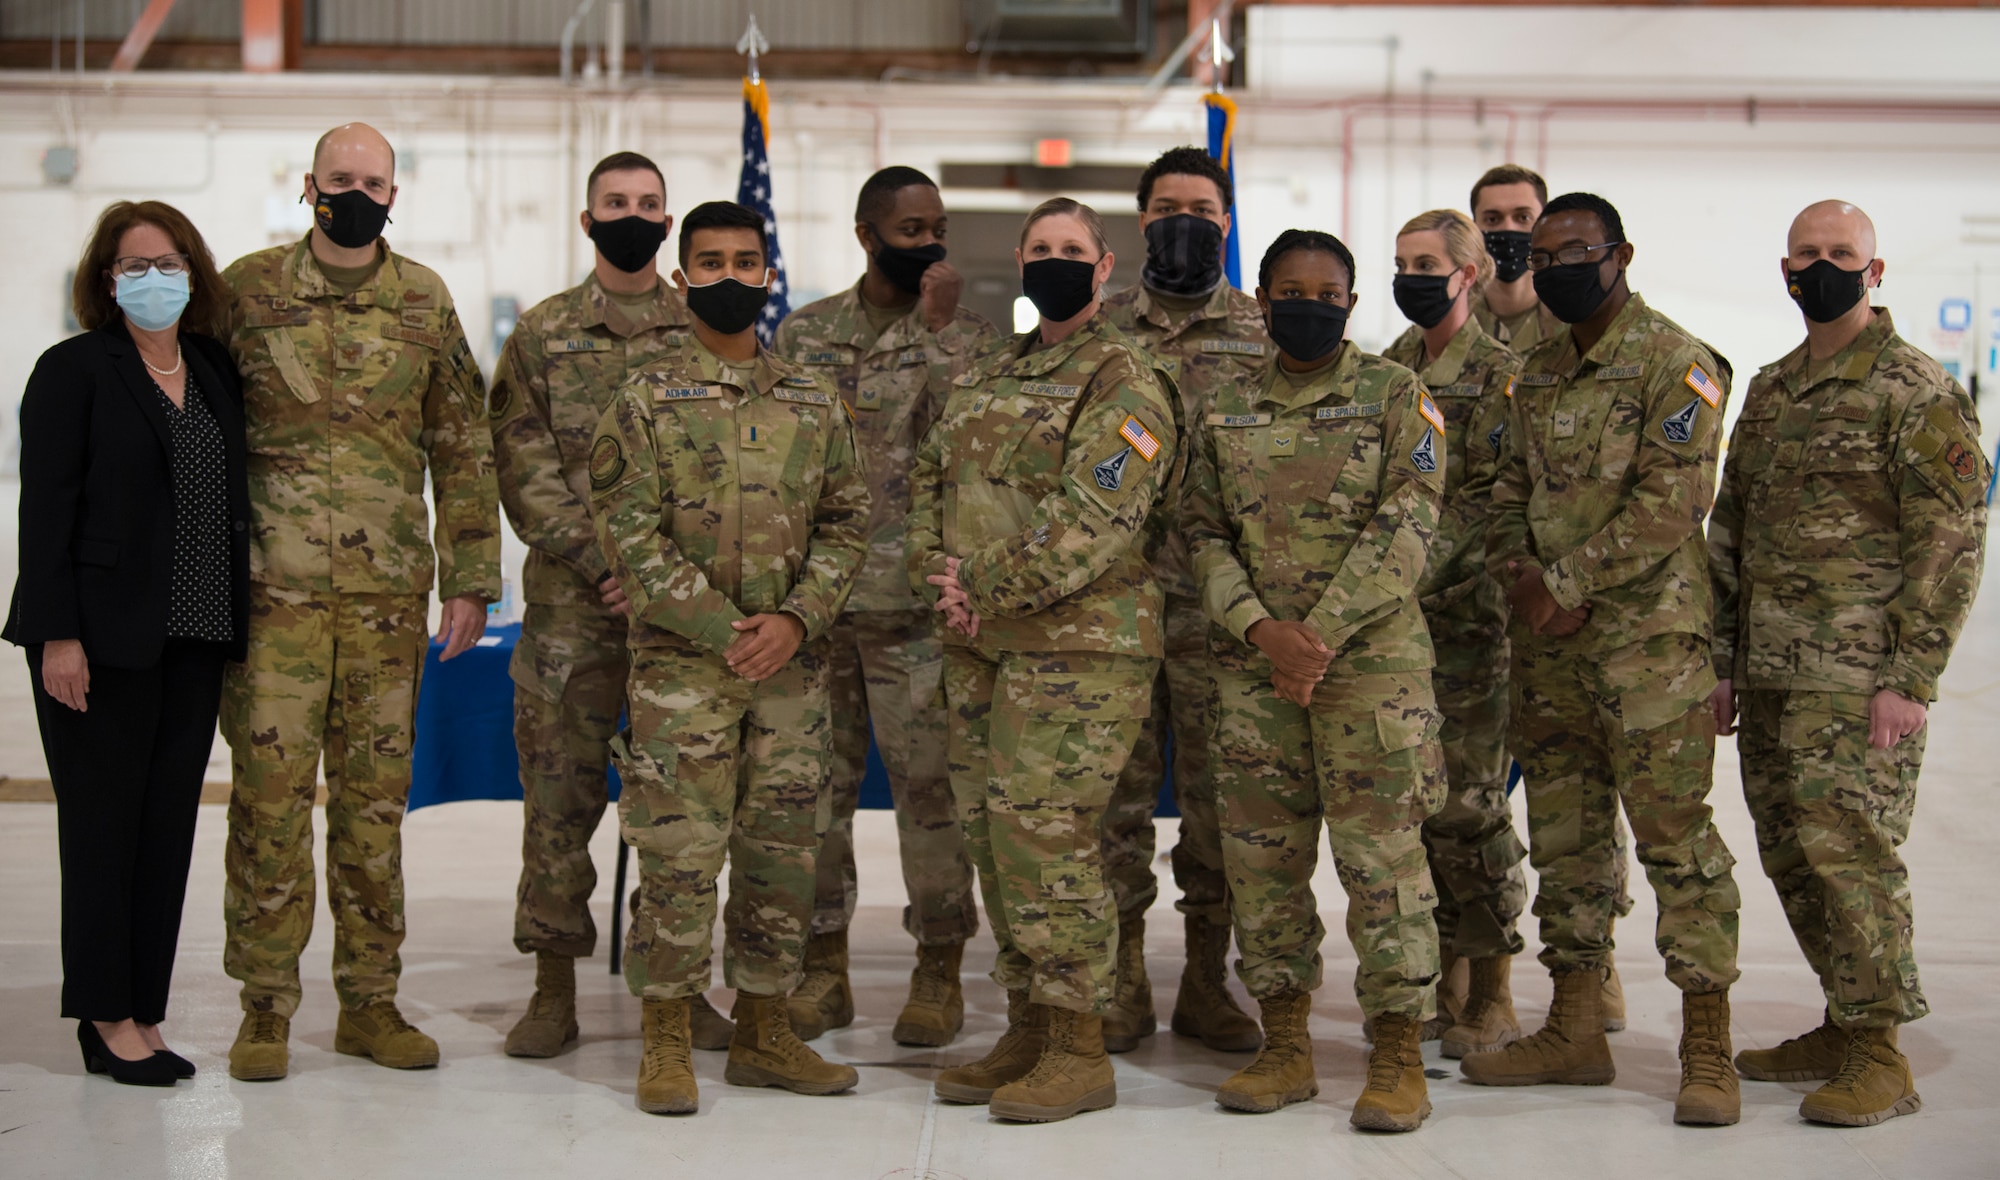 The 49th Wing leadership and newly transitioned U.S. Space Force Guardians pose for a photo, Feb. 12, 2021, on Holloman Air Force Base, New Mexico. The Airmen transitioning varied in rank: from Airman 1st Class to 1st Lieutenant. (U.S. Air Force photo by Airman 1st Class Jessica Sanchez)